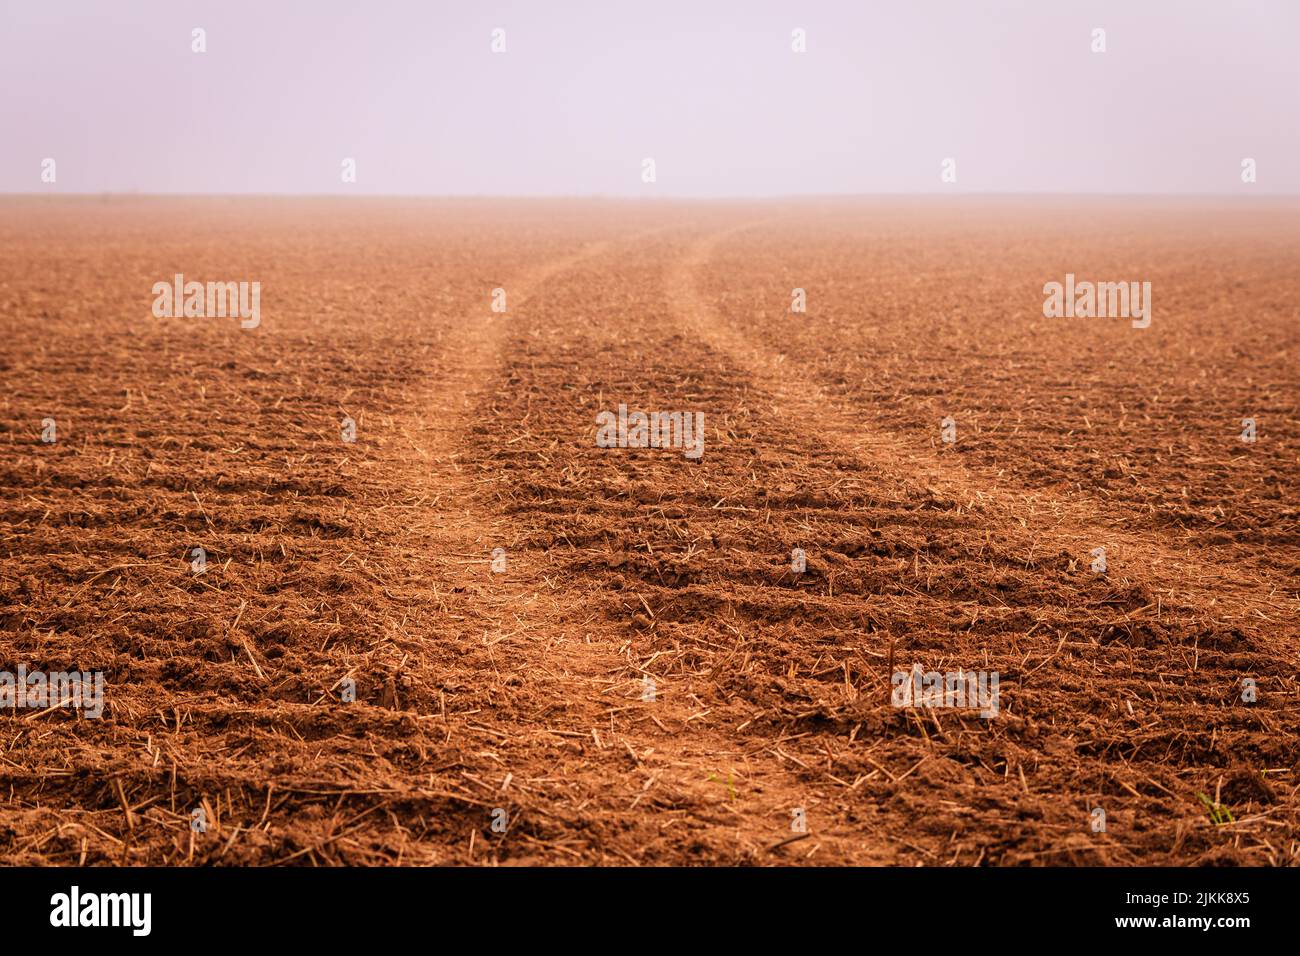 A natural view of truck wheel marks on a plowed agricultural field during a foggy day Stock Photo